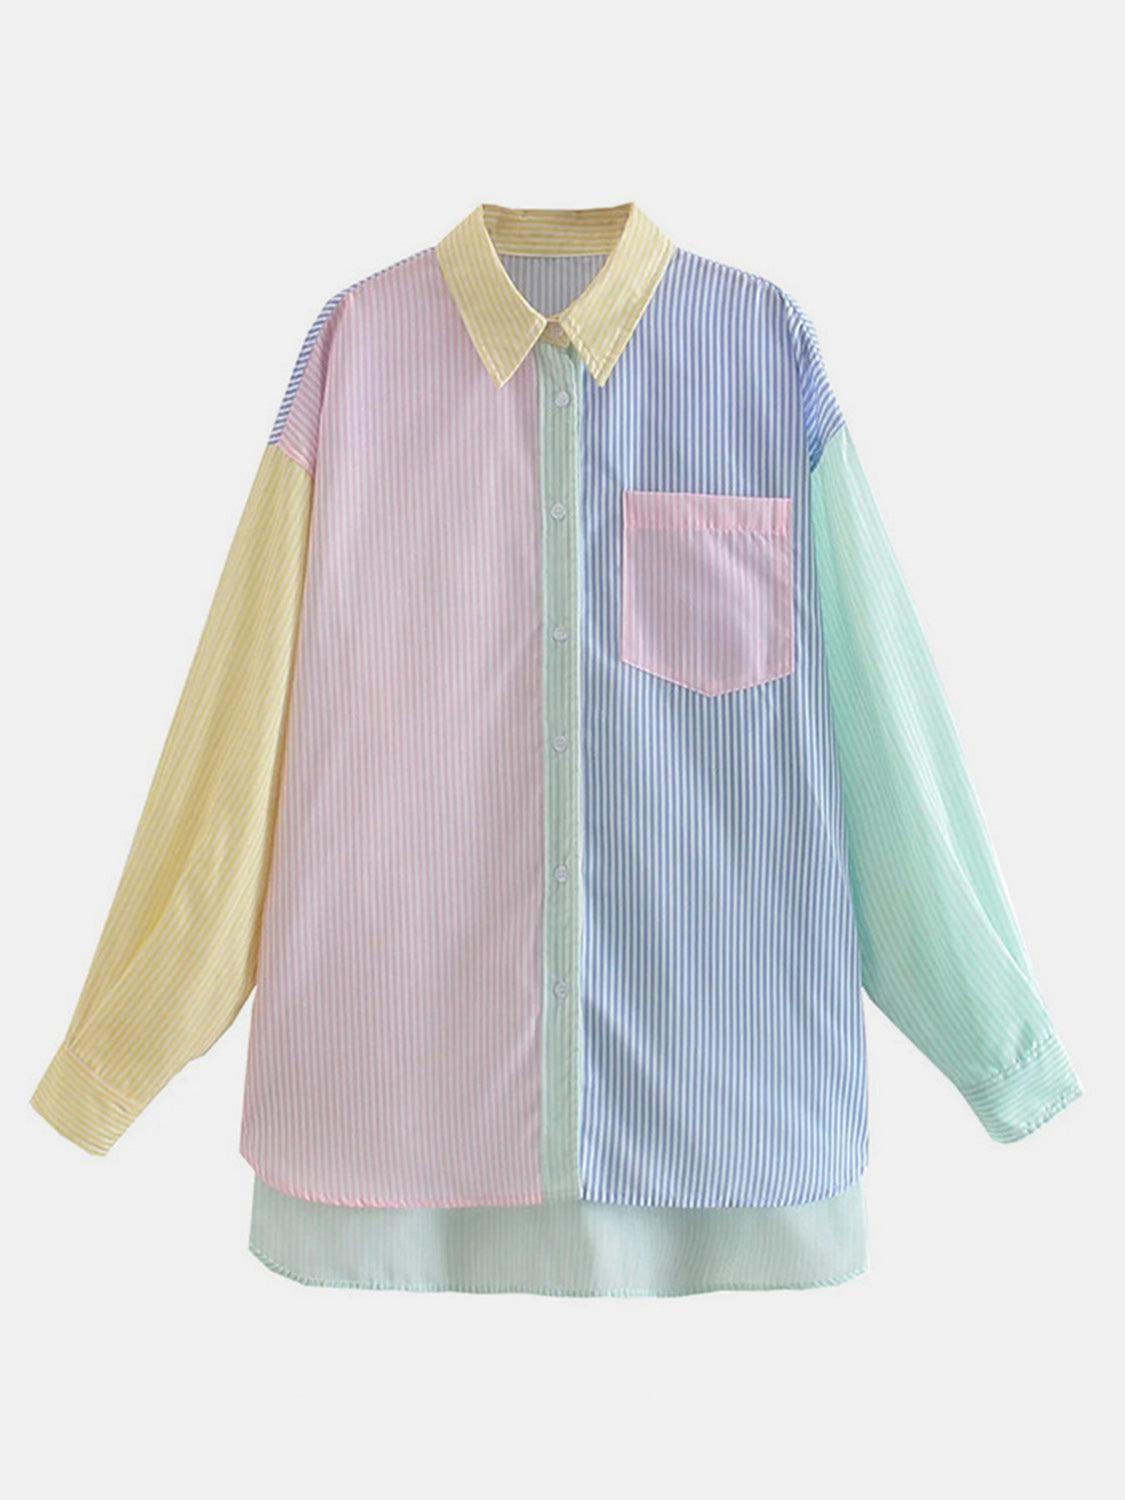 a shirt with a multicolored shirt collar